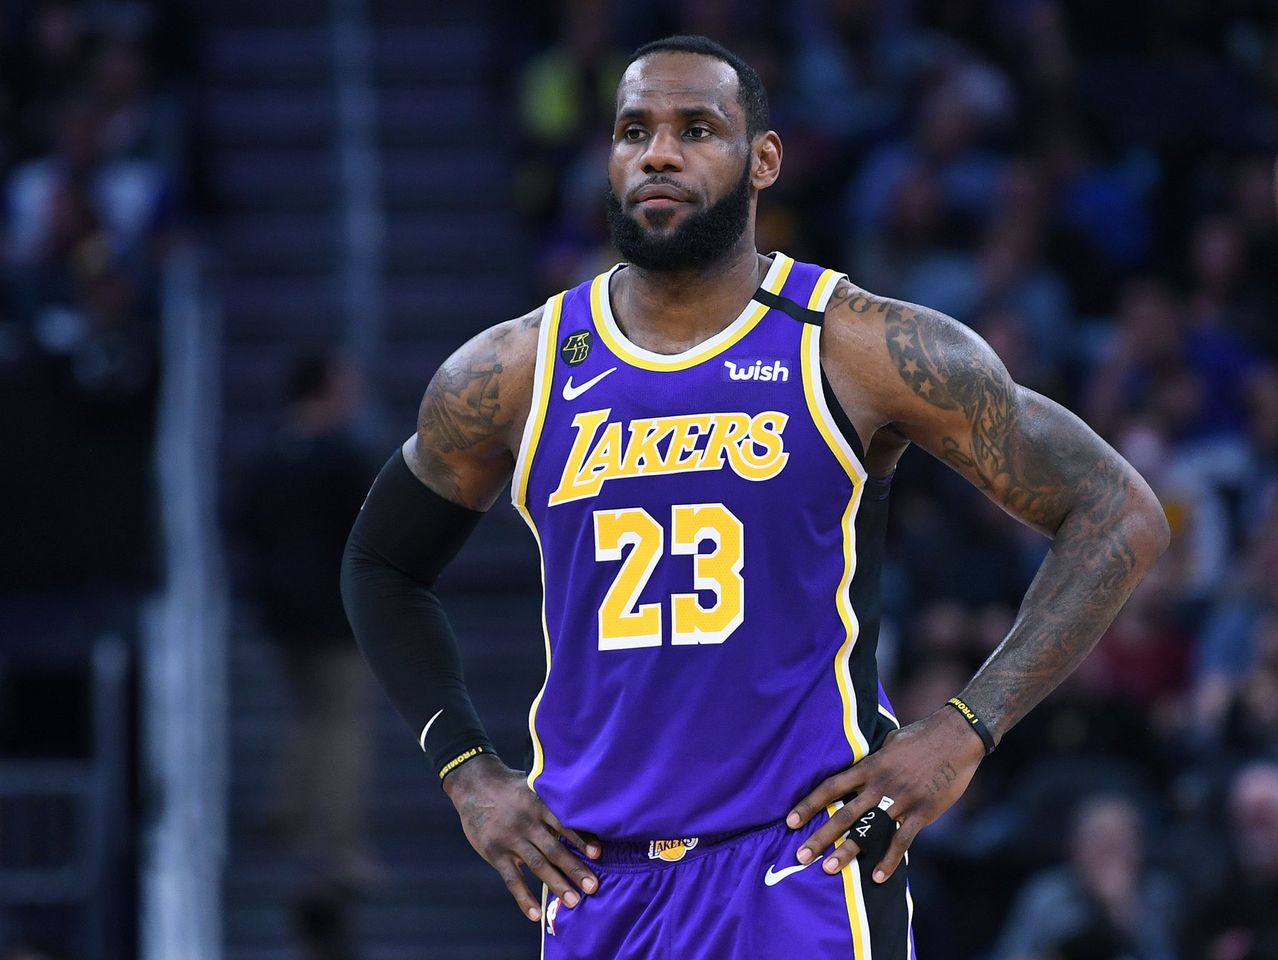 LeBron James #23 of the Los Angeles Lakers during an NBA basketball game on February 08, 2020. | Photo: Getty Images